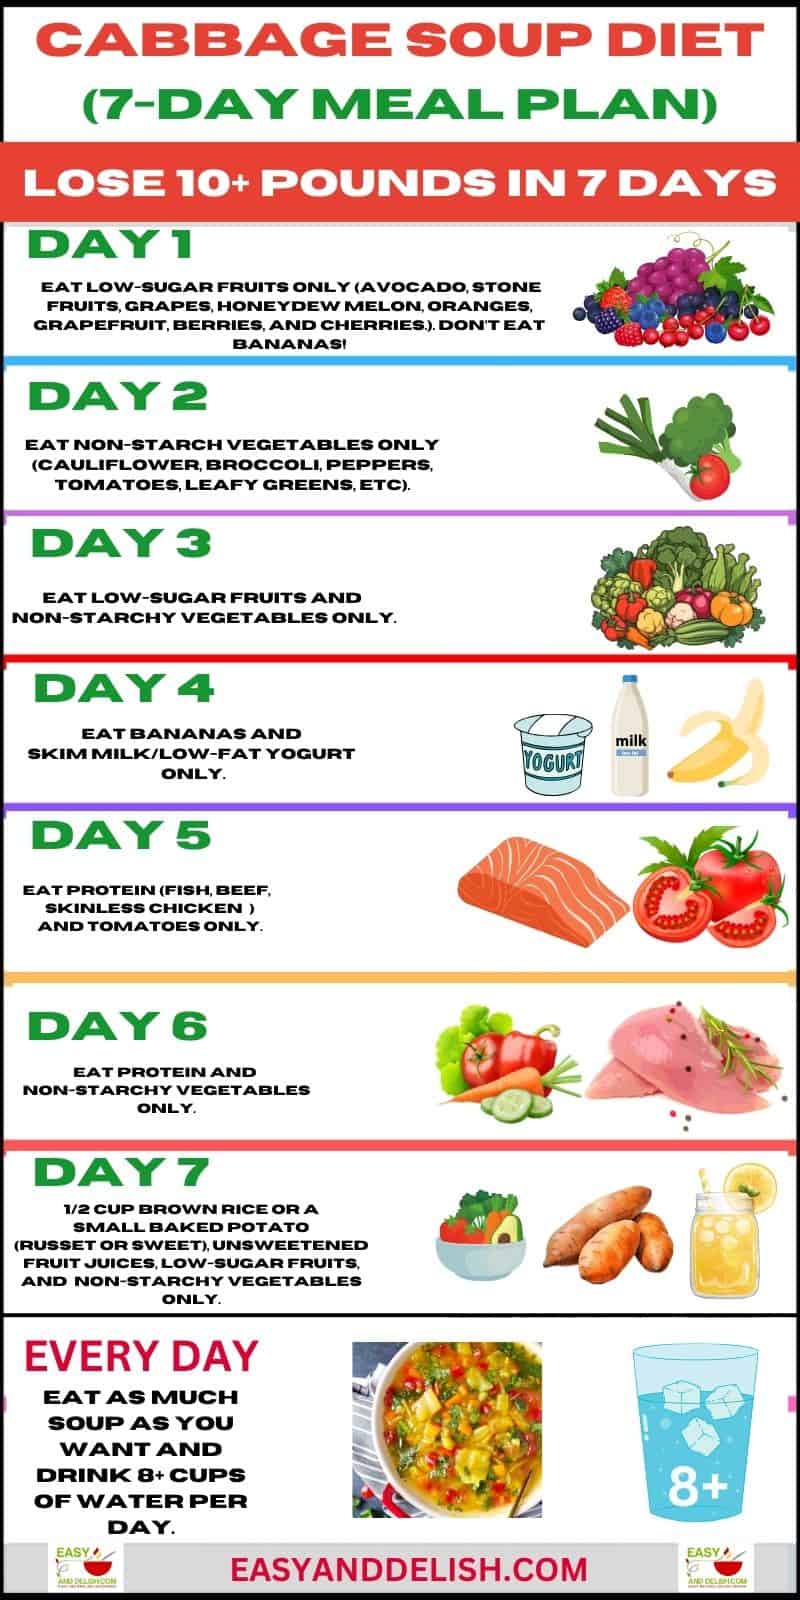 7-Day Cabbage Soup Diet Recipe Meal Plan or Menu containing all the foods one can eat during those days on the diet.